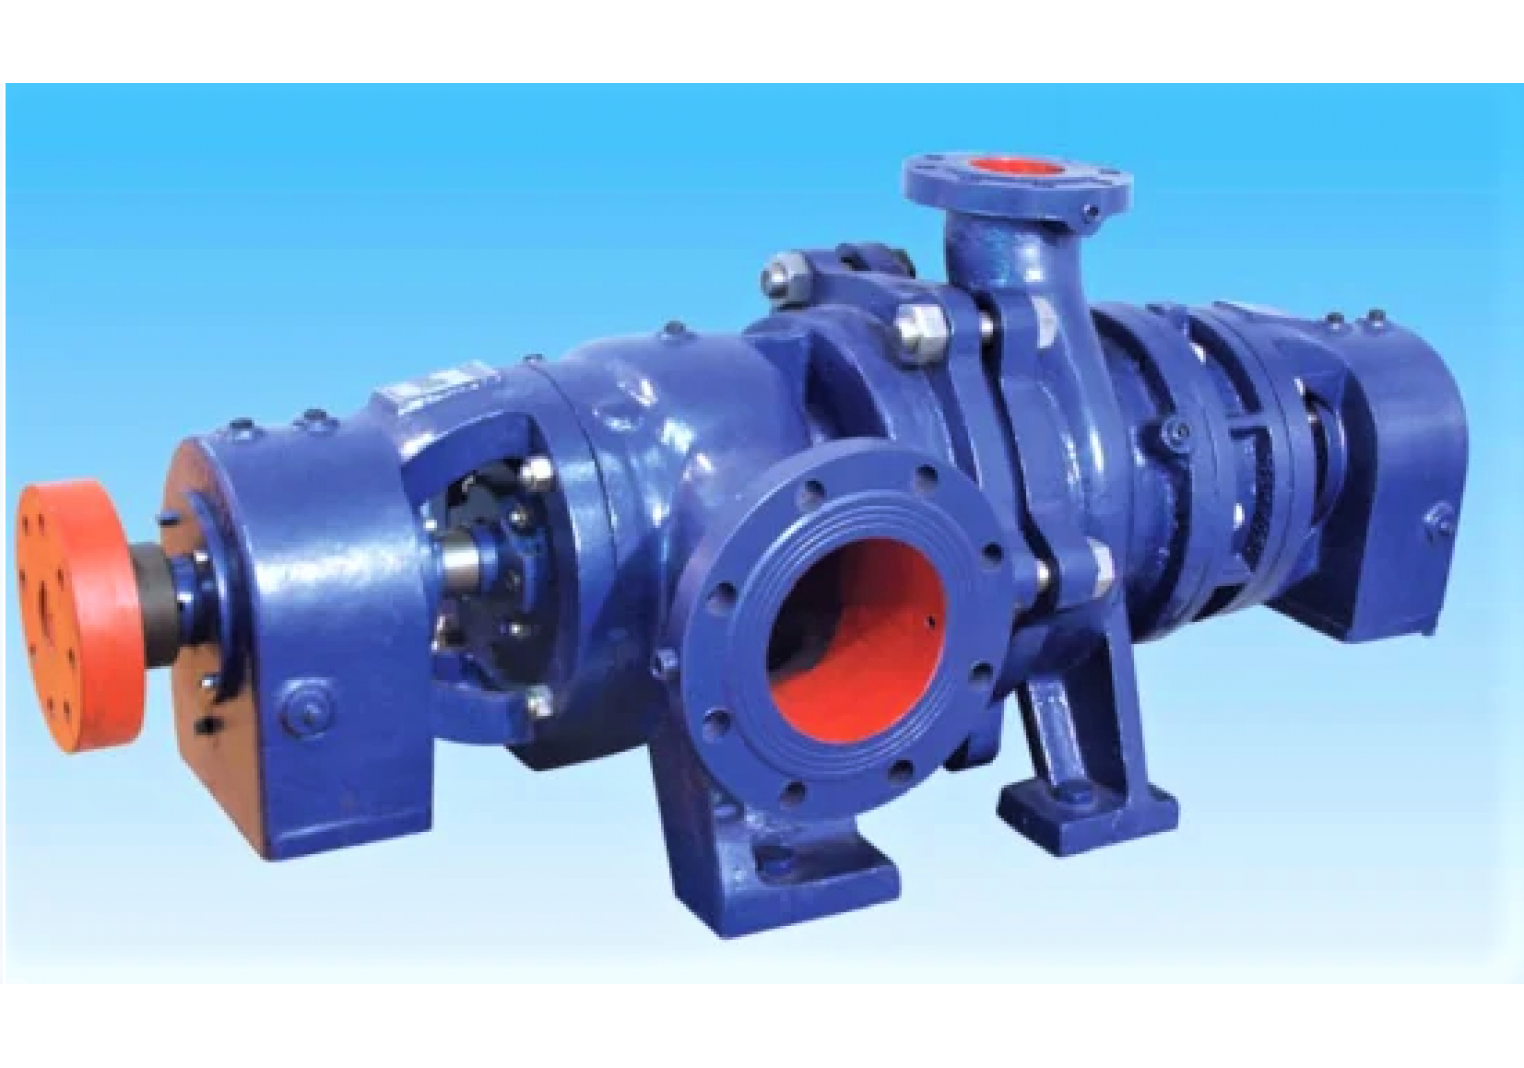 Condensate Water Pump NW